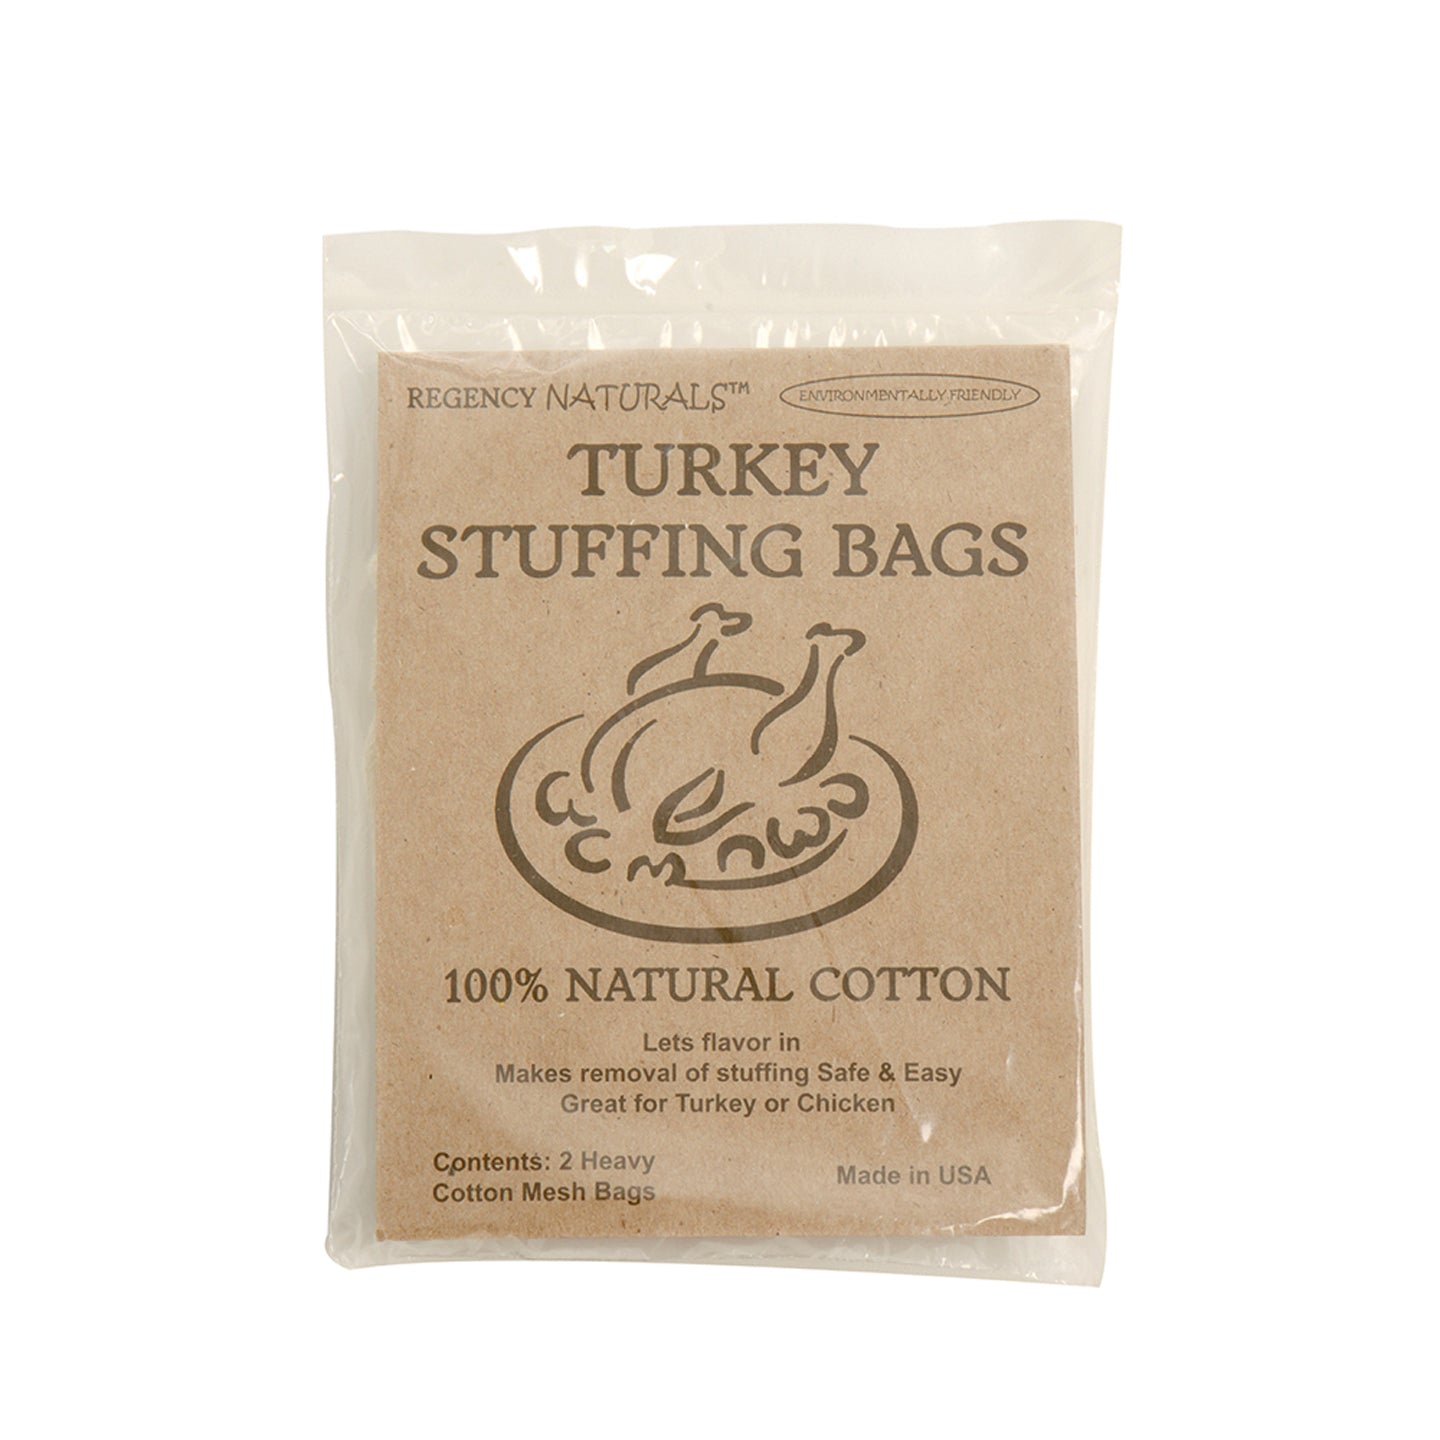 Turkey Stuffing Bags / Pack of 2